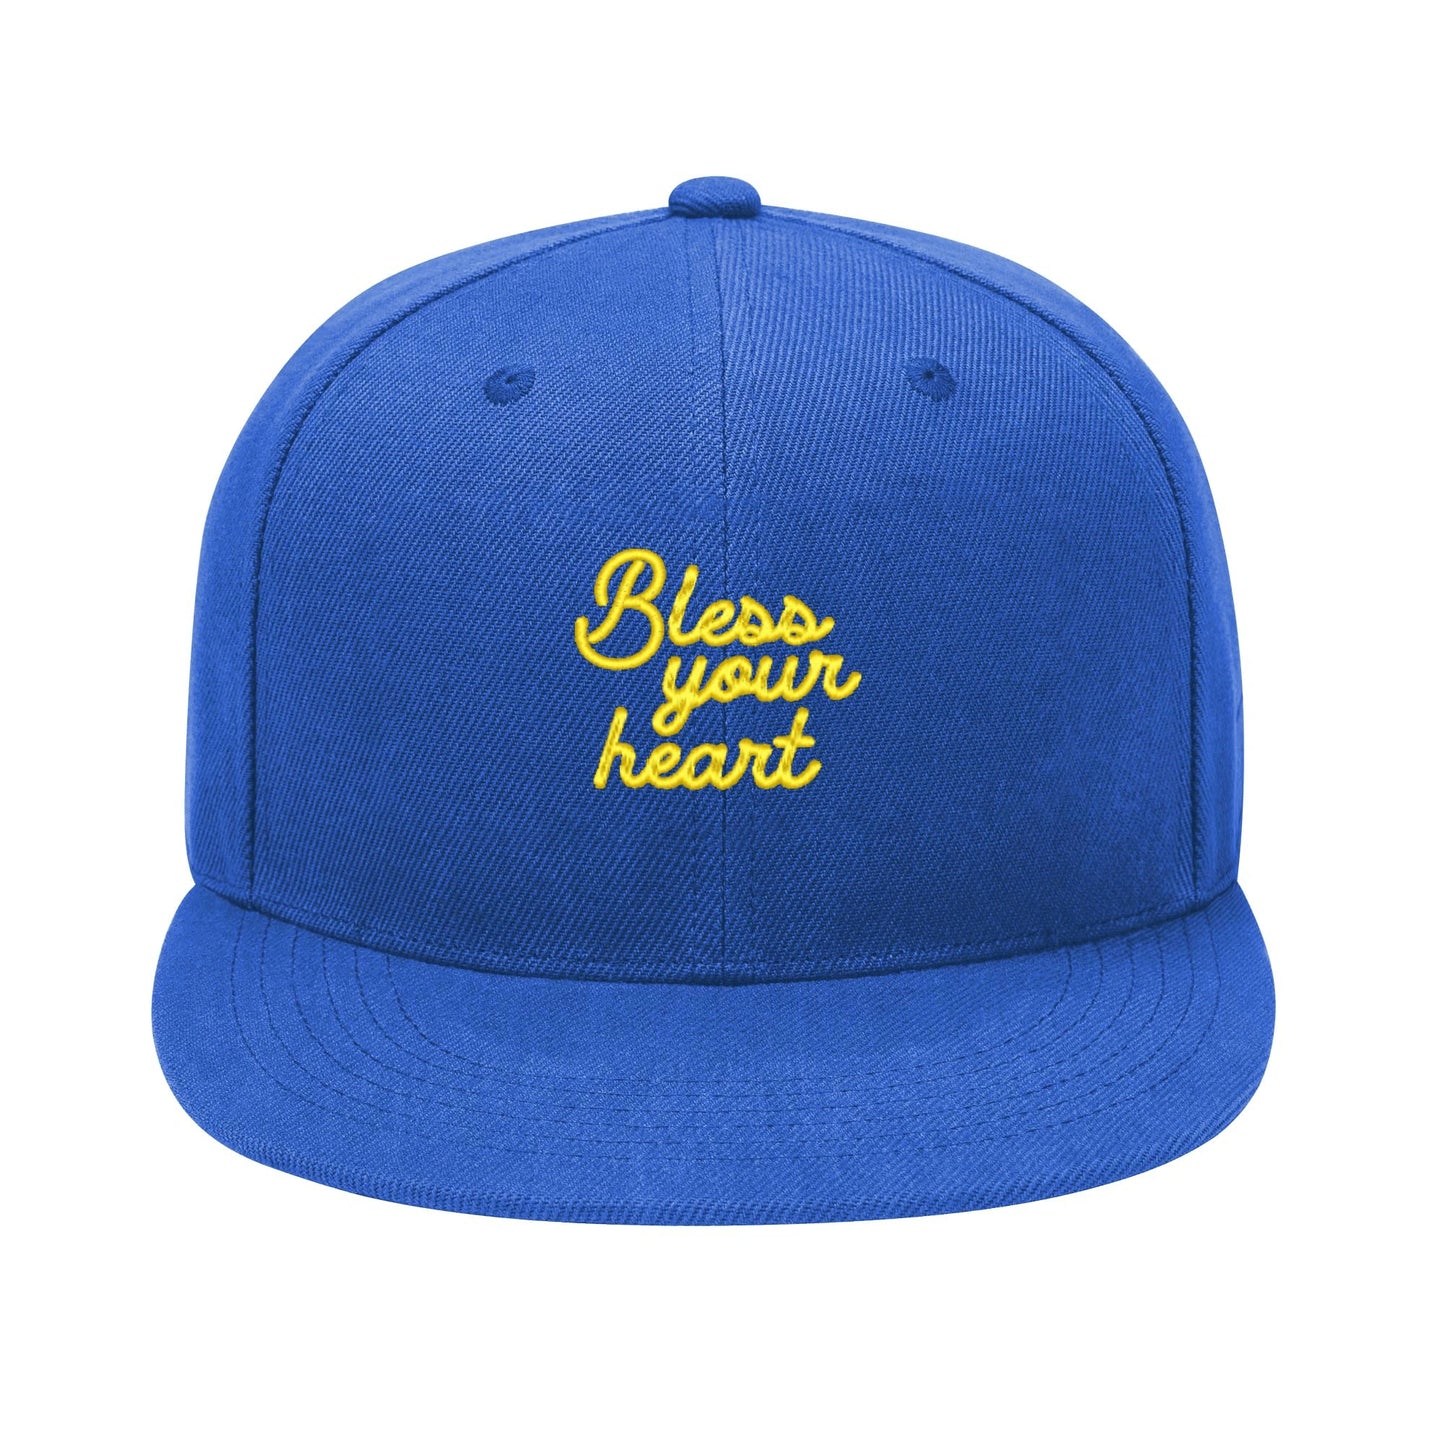 Bless Your Heart Scripted flat bill hat